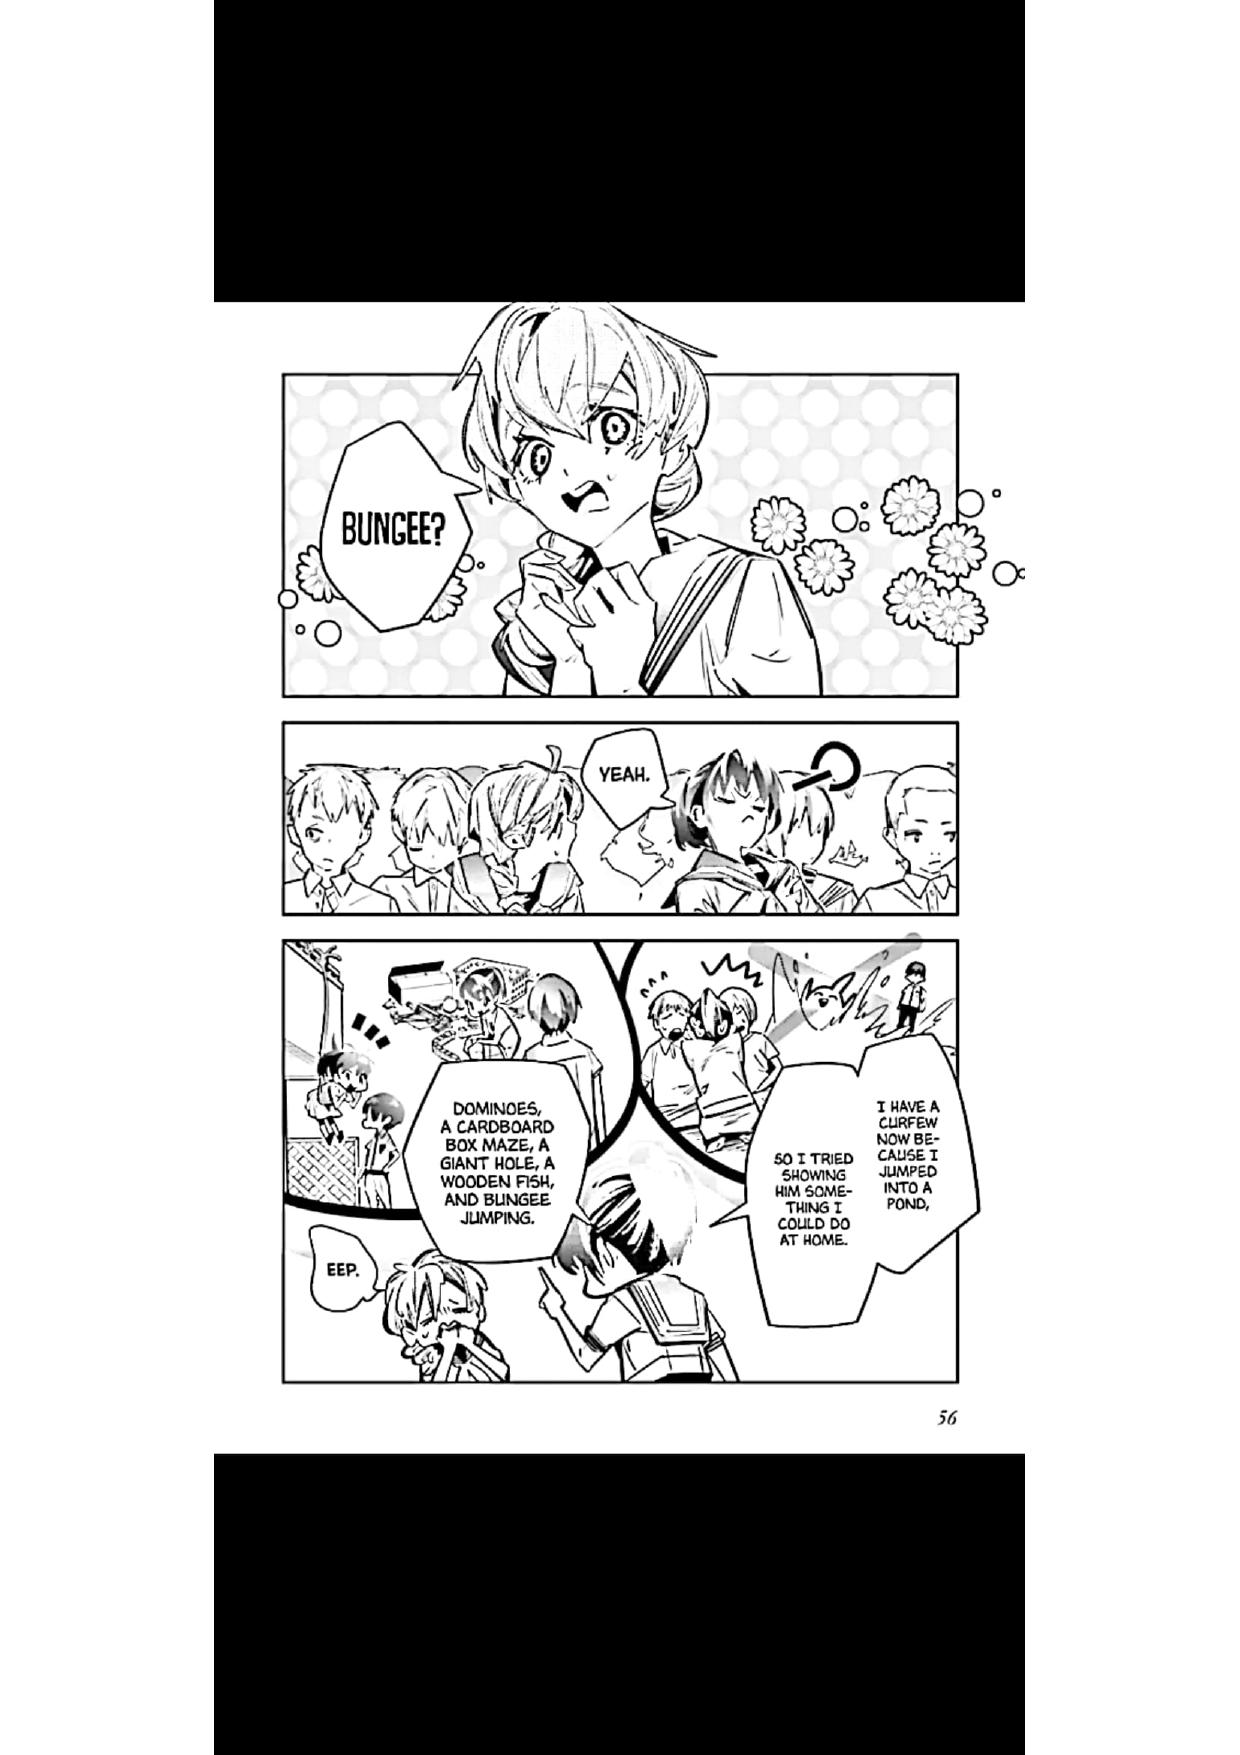 I Reincarnated As The Little Sister Of A Death Game Manga’S Murd3R Mastermind And Failed - Page 3